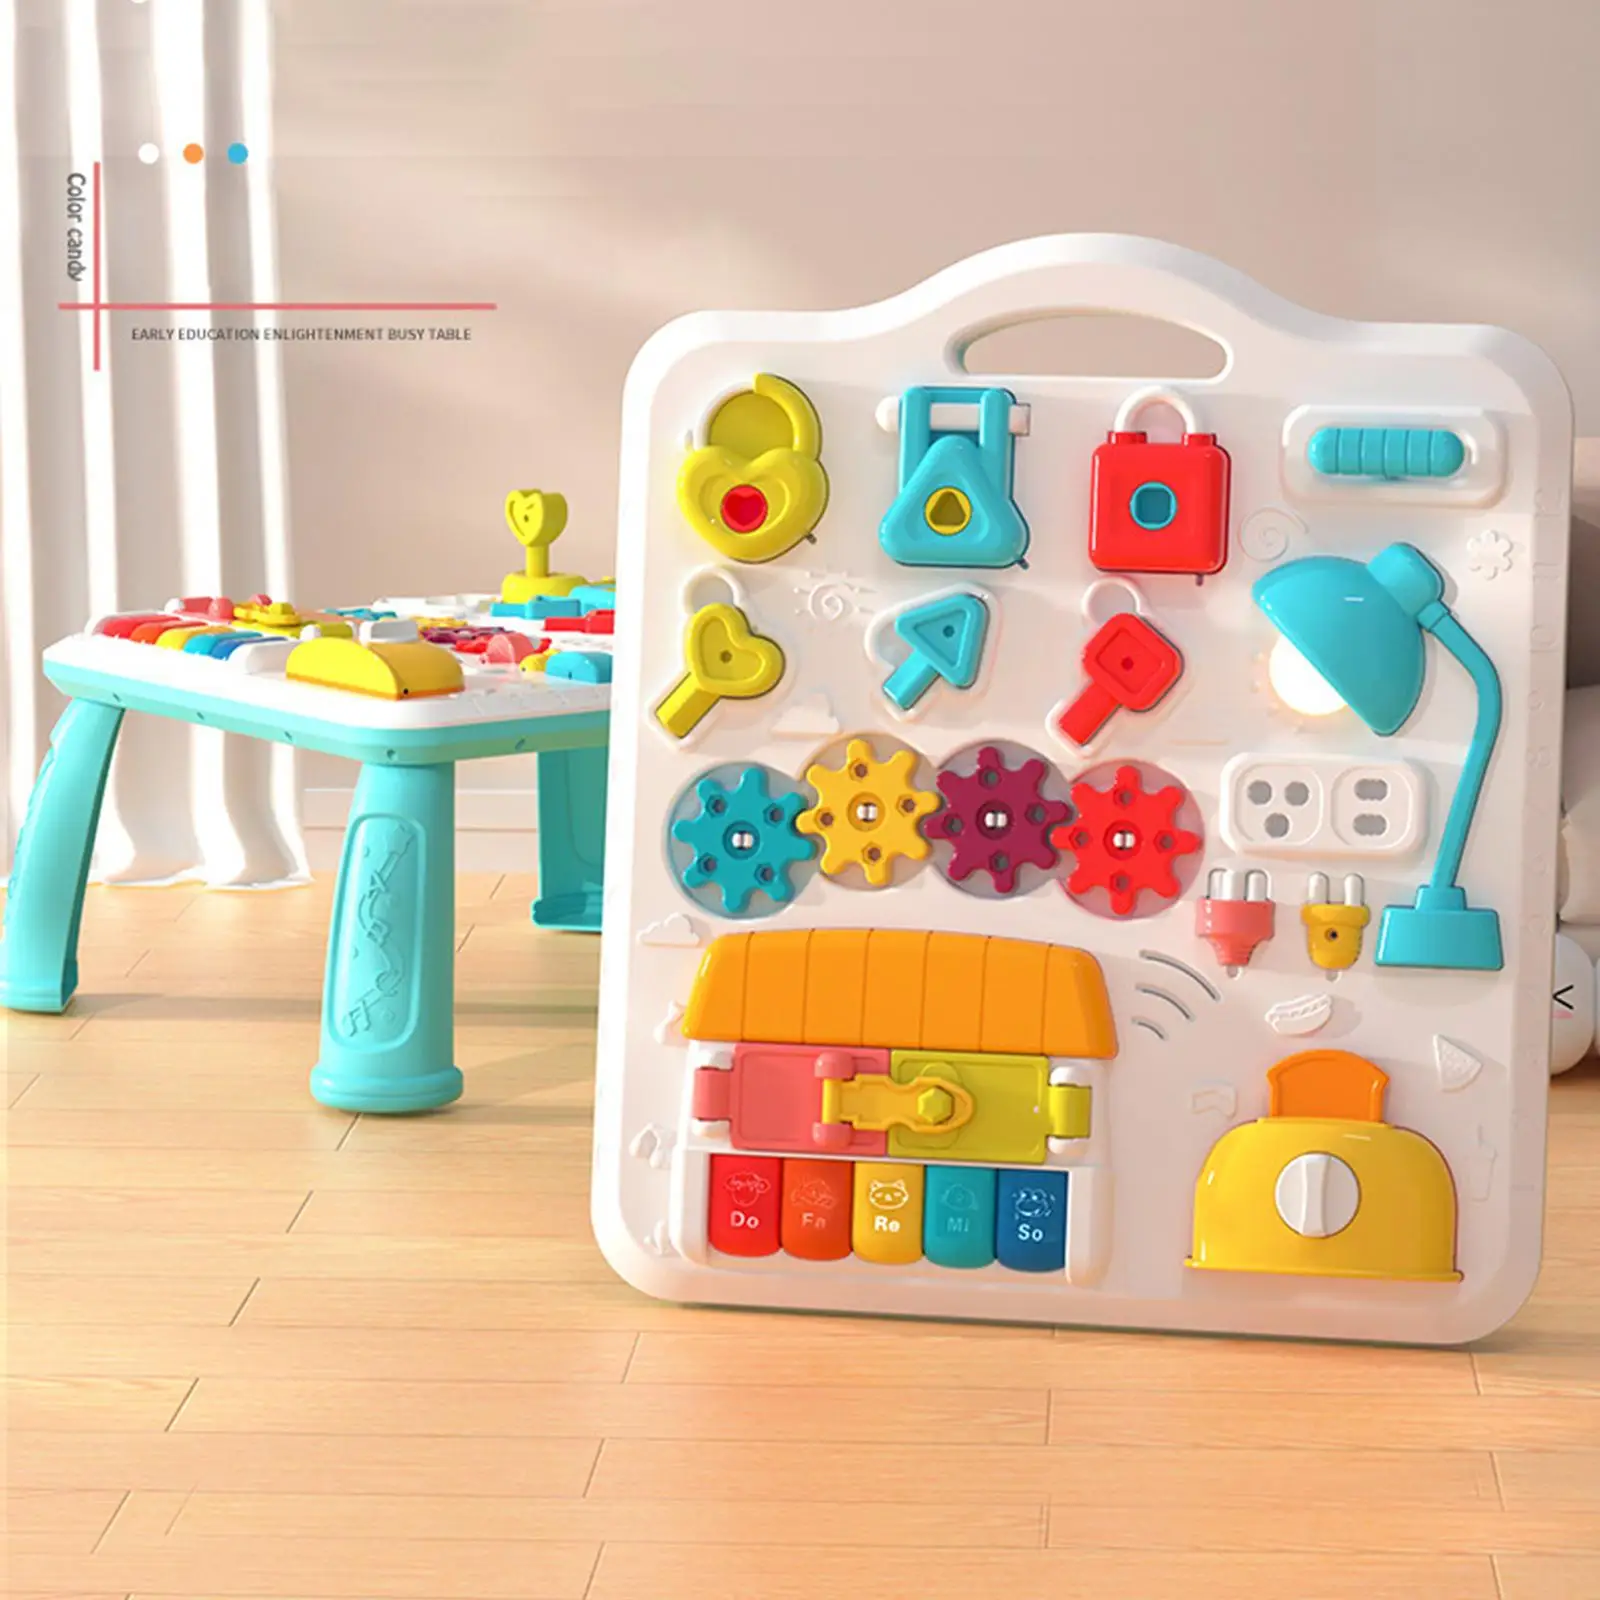 Learning Table Early Education toys Detachable with Leg Support Busy Table for Gift Girls